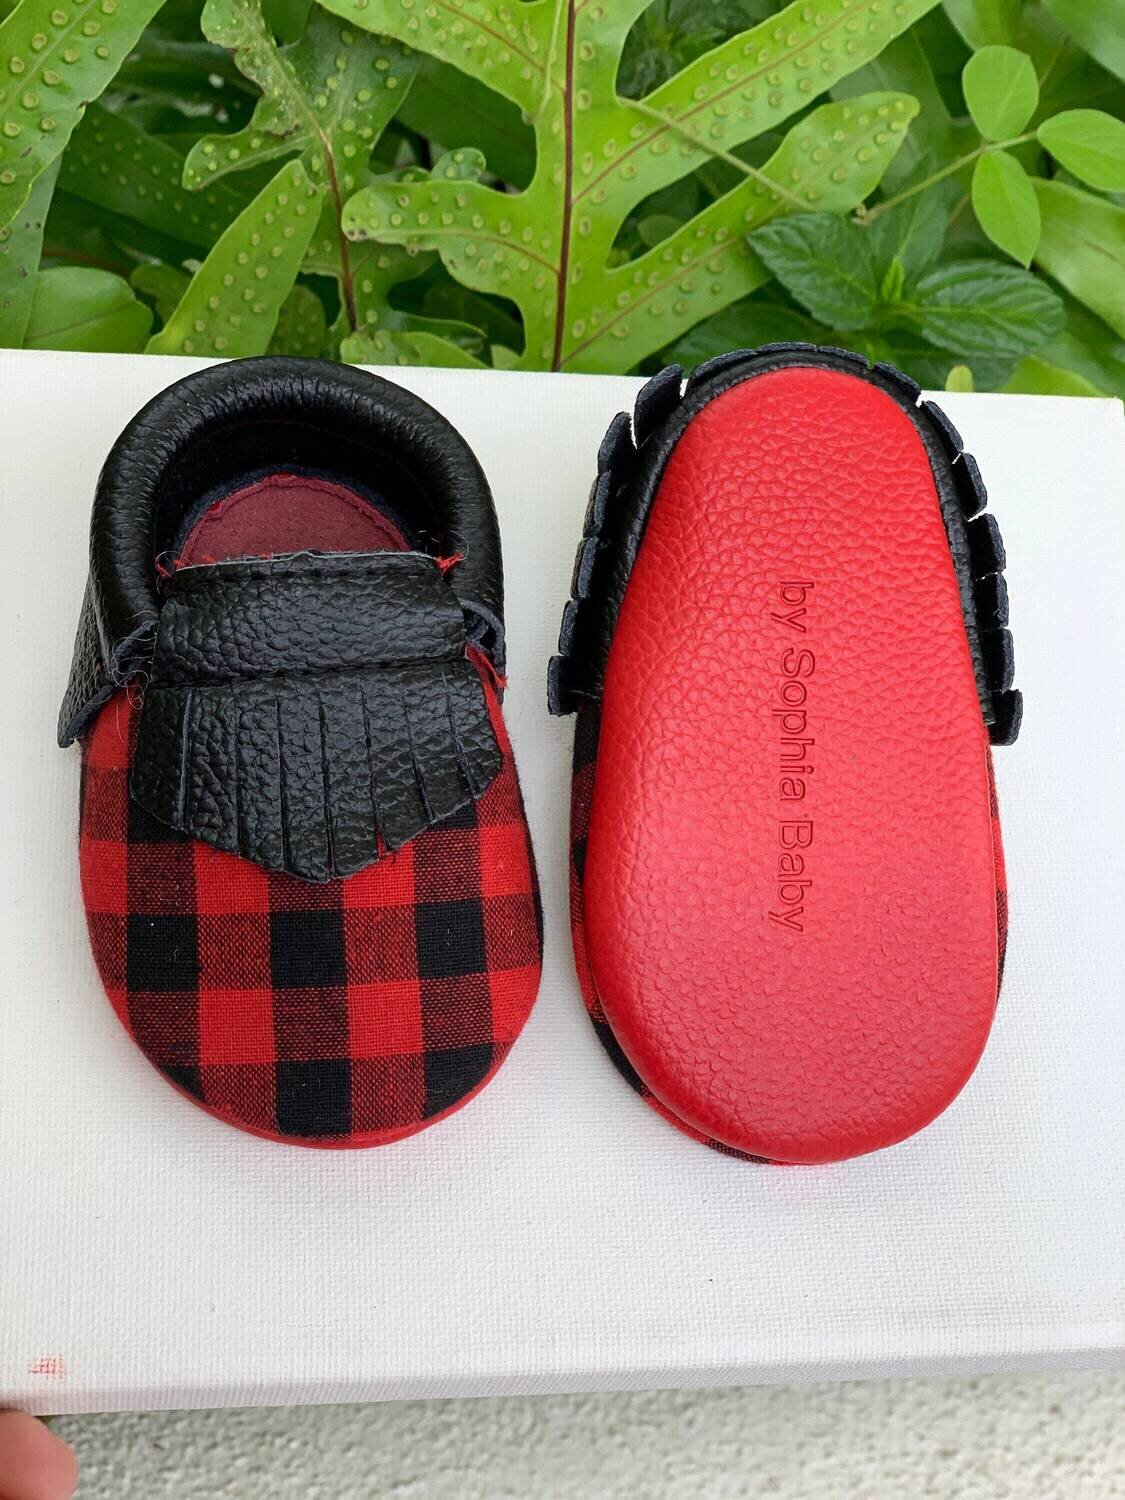 CHRISTMAS PLAID Red Bottom Moccasins Baby Black and Red sole Fringe Moccasins Baby Leather Shoes Toddler Moccasins Red Baby Moccs